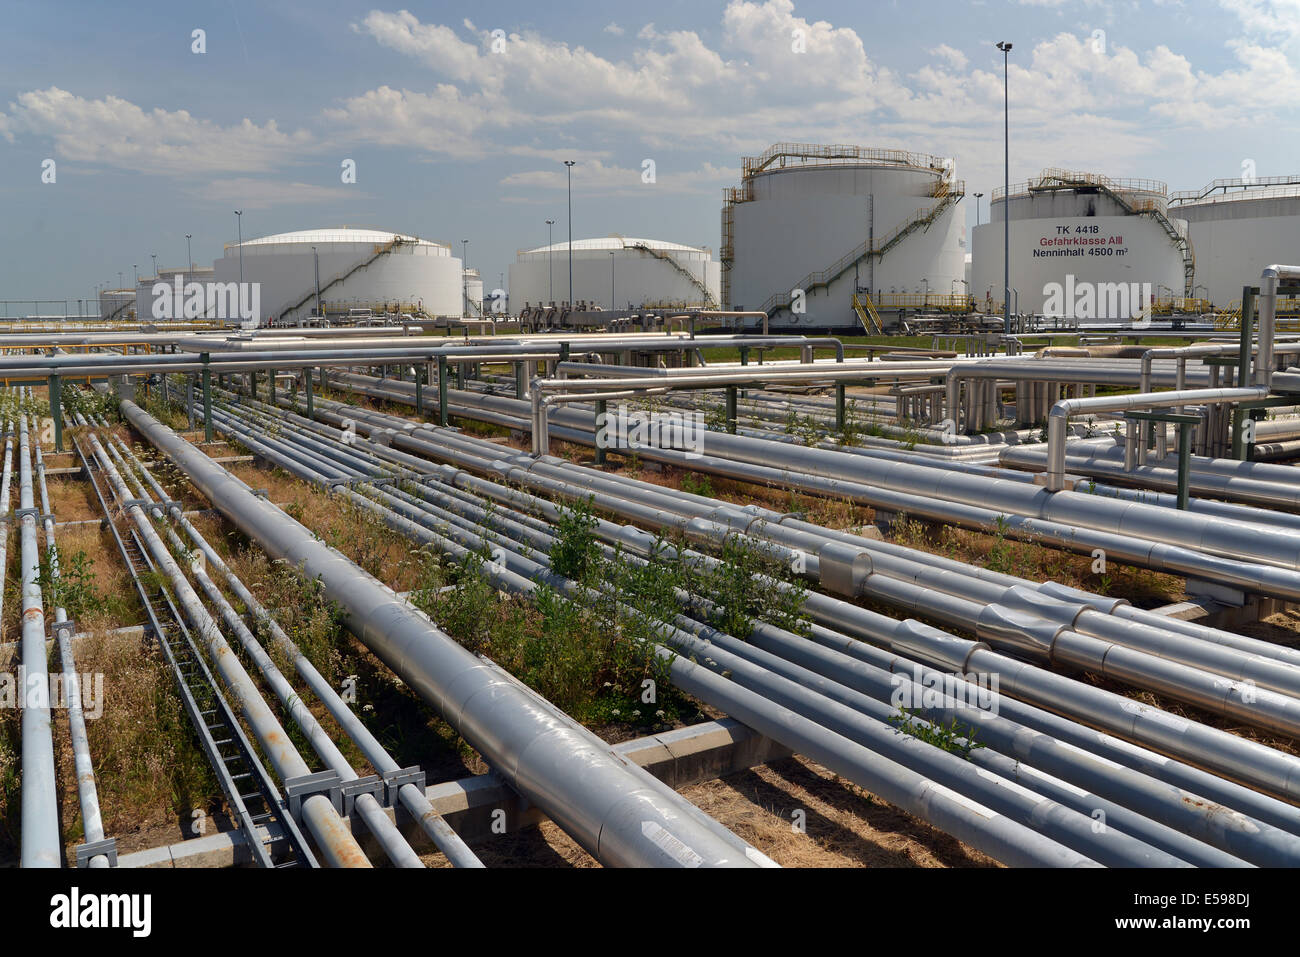 Germany, Saxony-Anhalt, pipes in the tank farm at a refinery Stock Photo